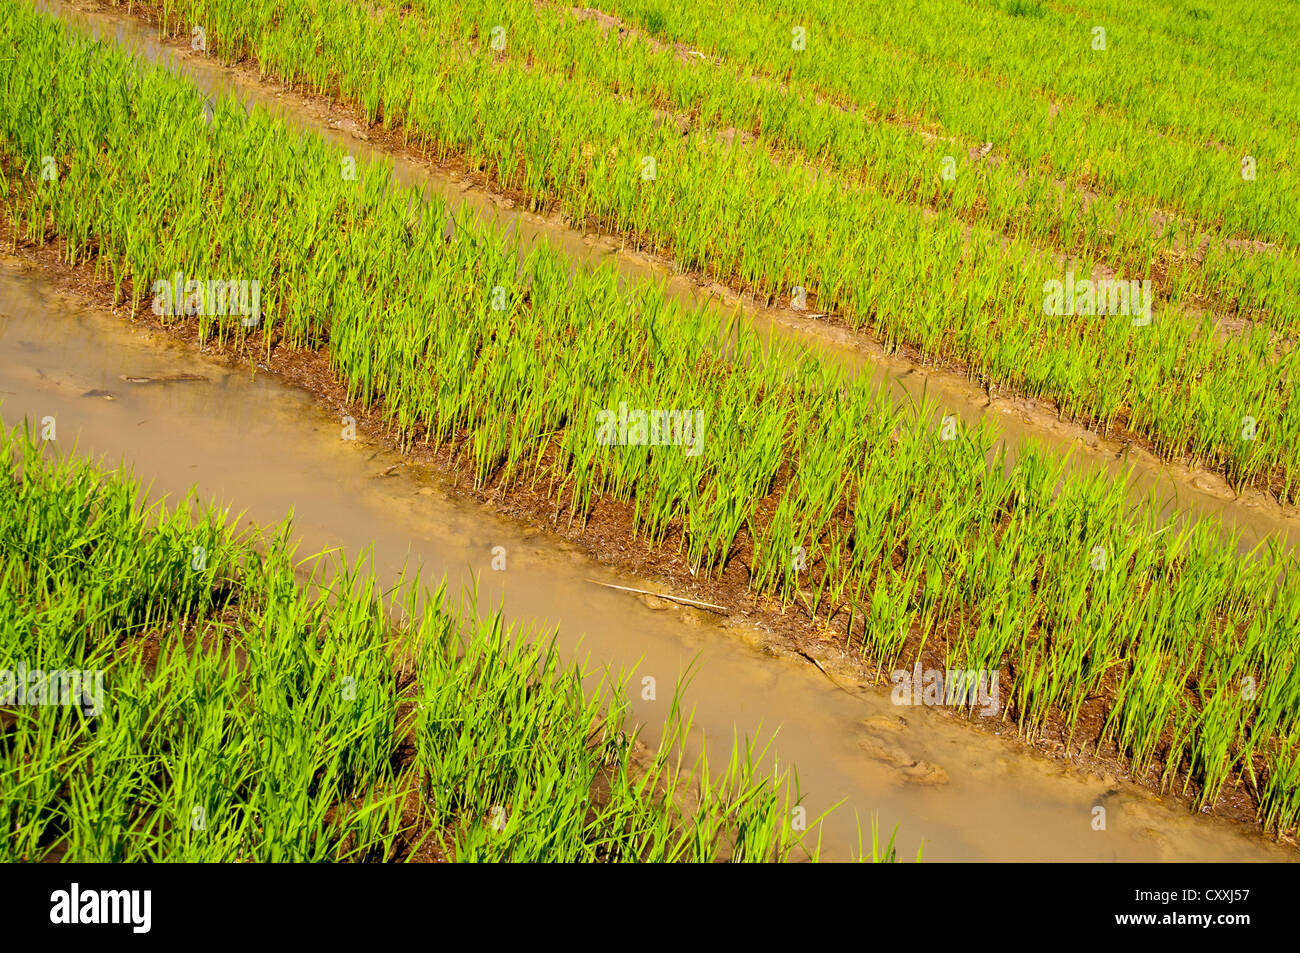 Rice plants in the water, rice farming, rice paddy, Northern Thailand, Thailand, Asia Stock Photo